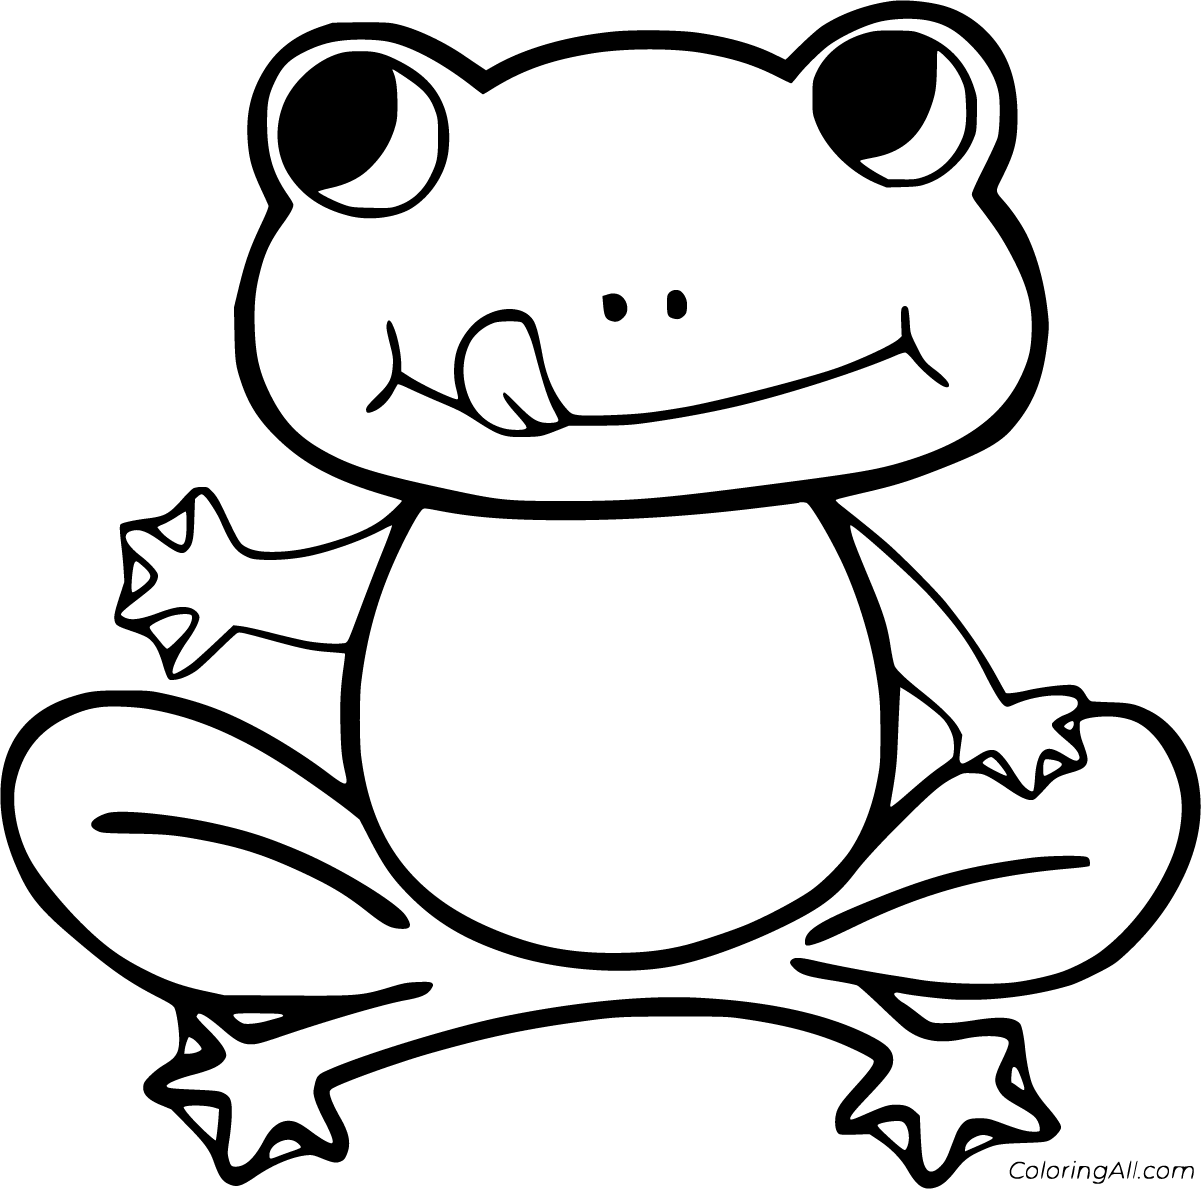 Download Frog Coloring Pages - ColoringAll